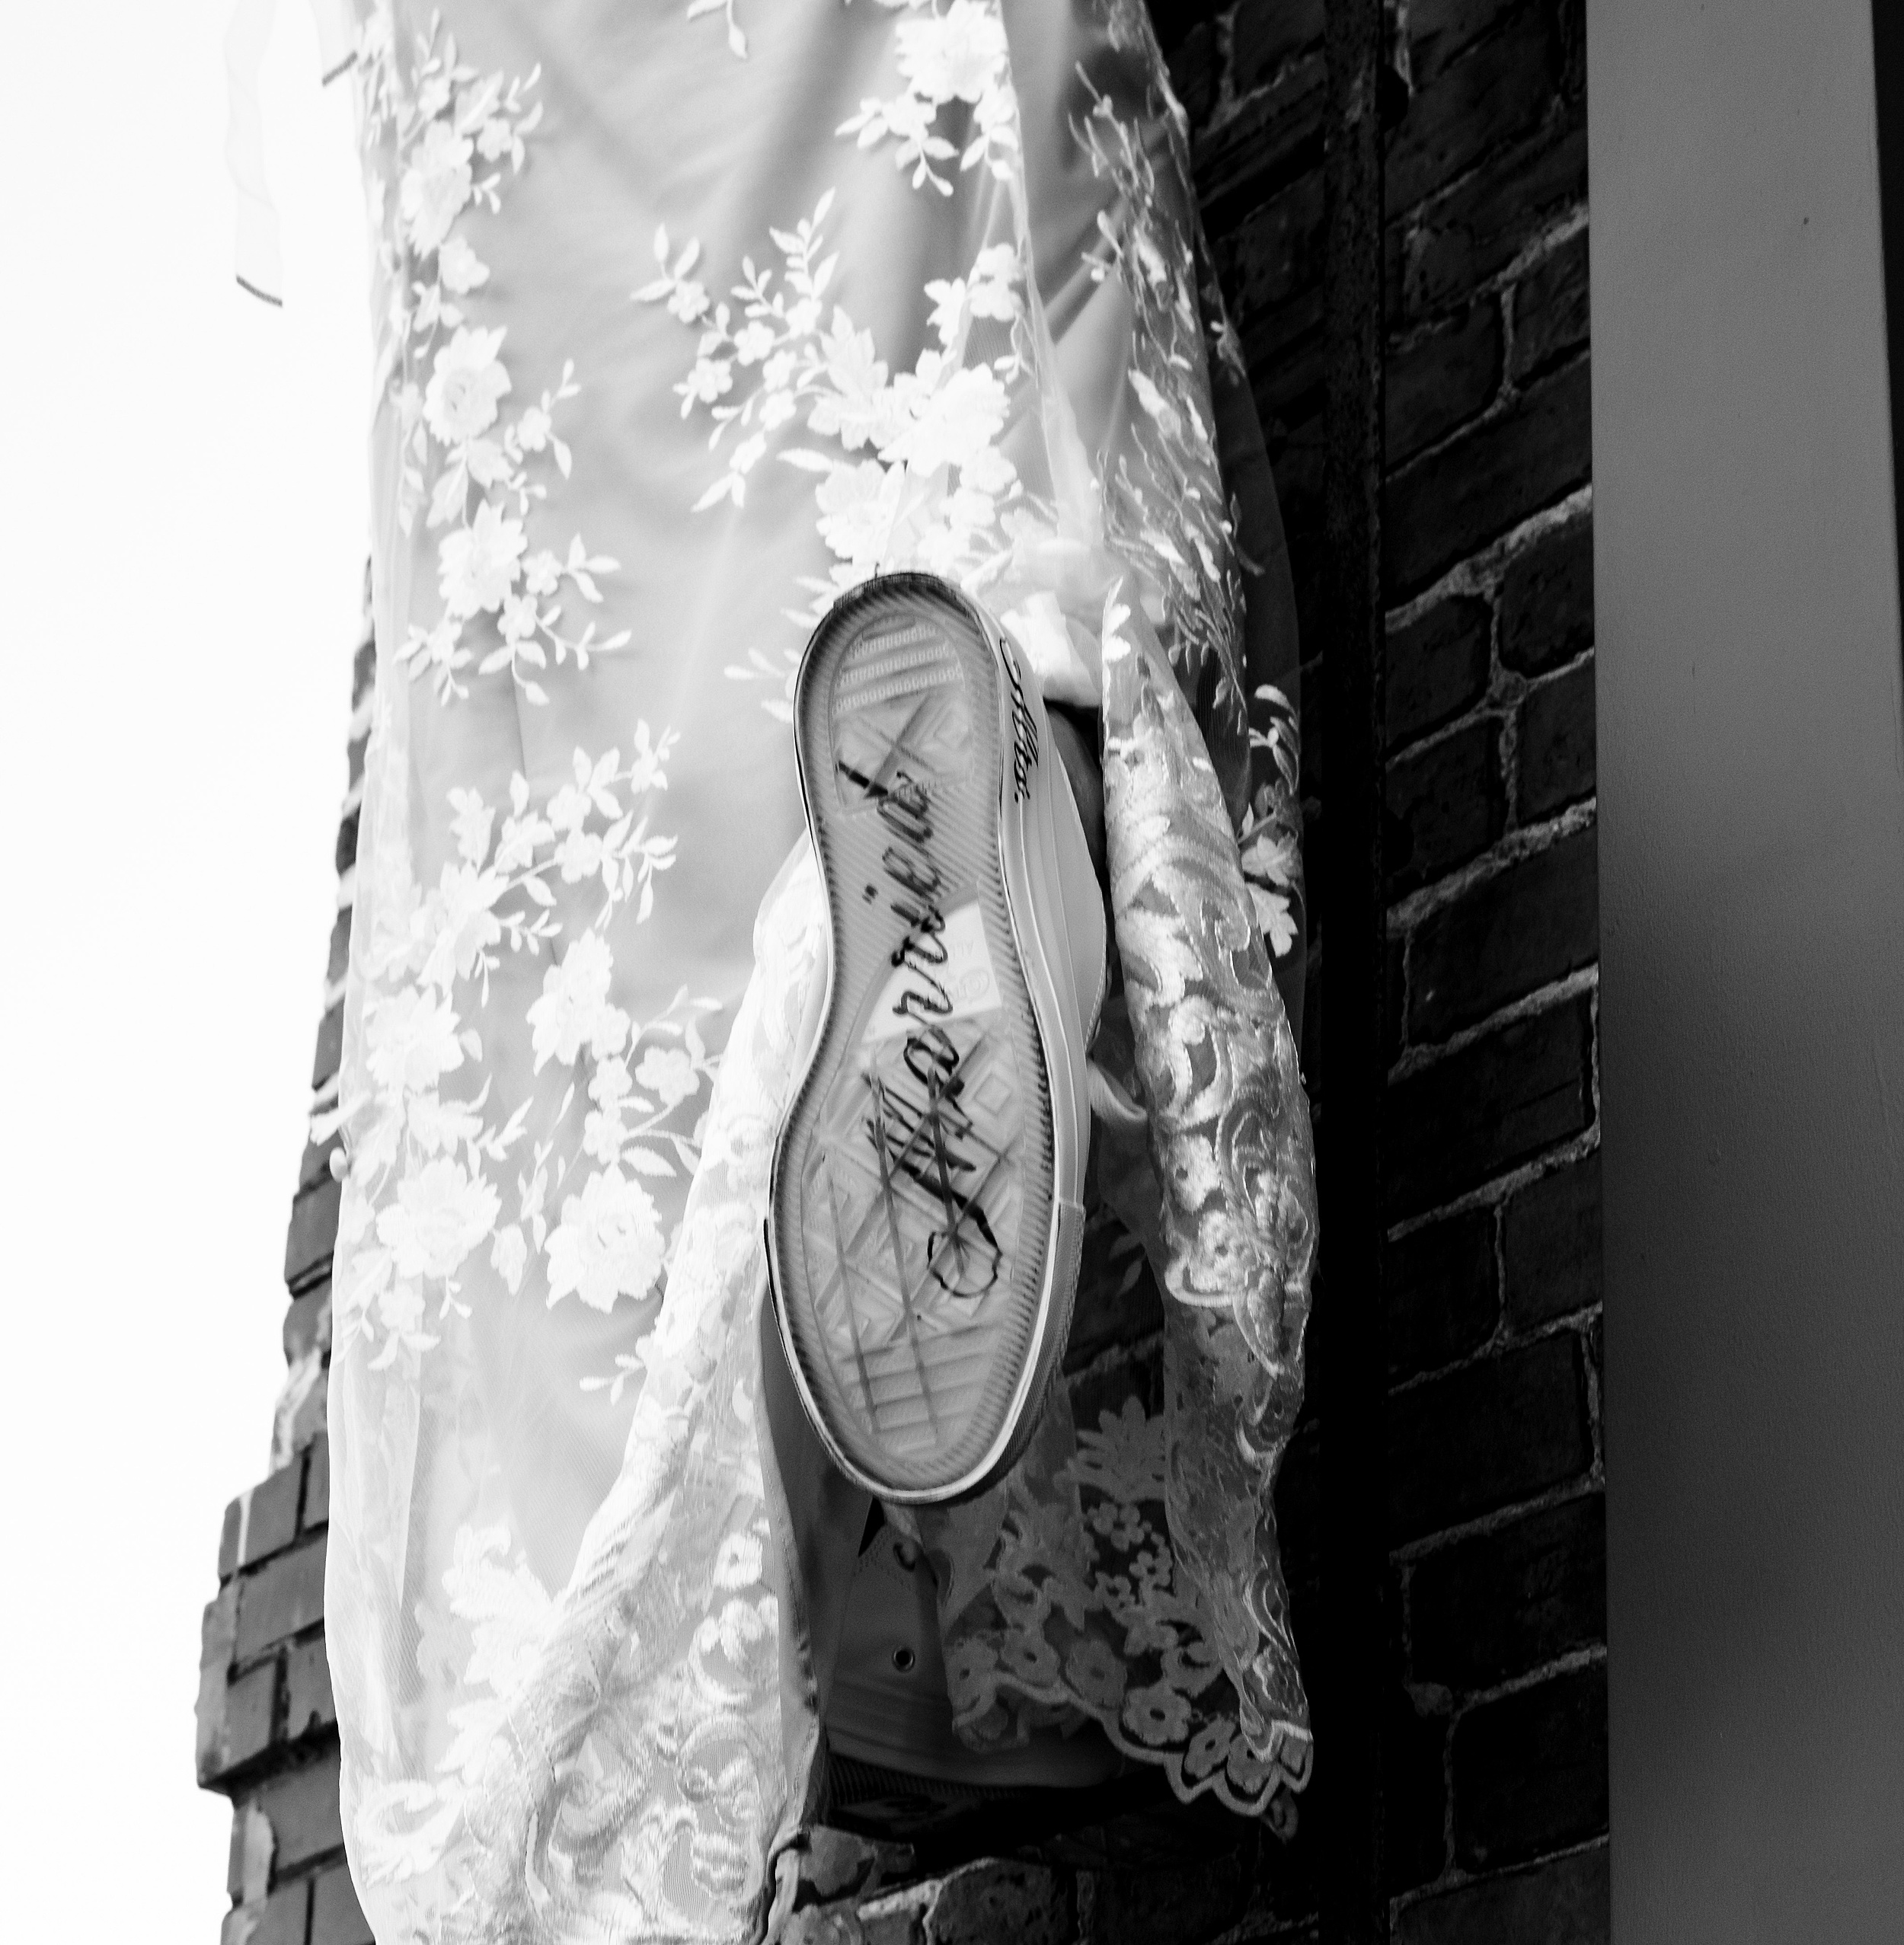 Details of a bride's custom shoe against a brick wall at the assembly room st augustine